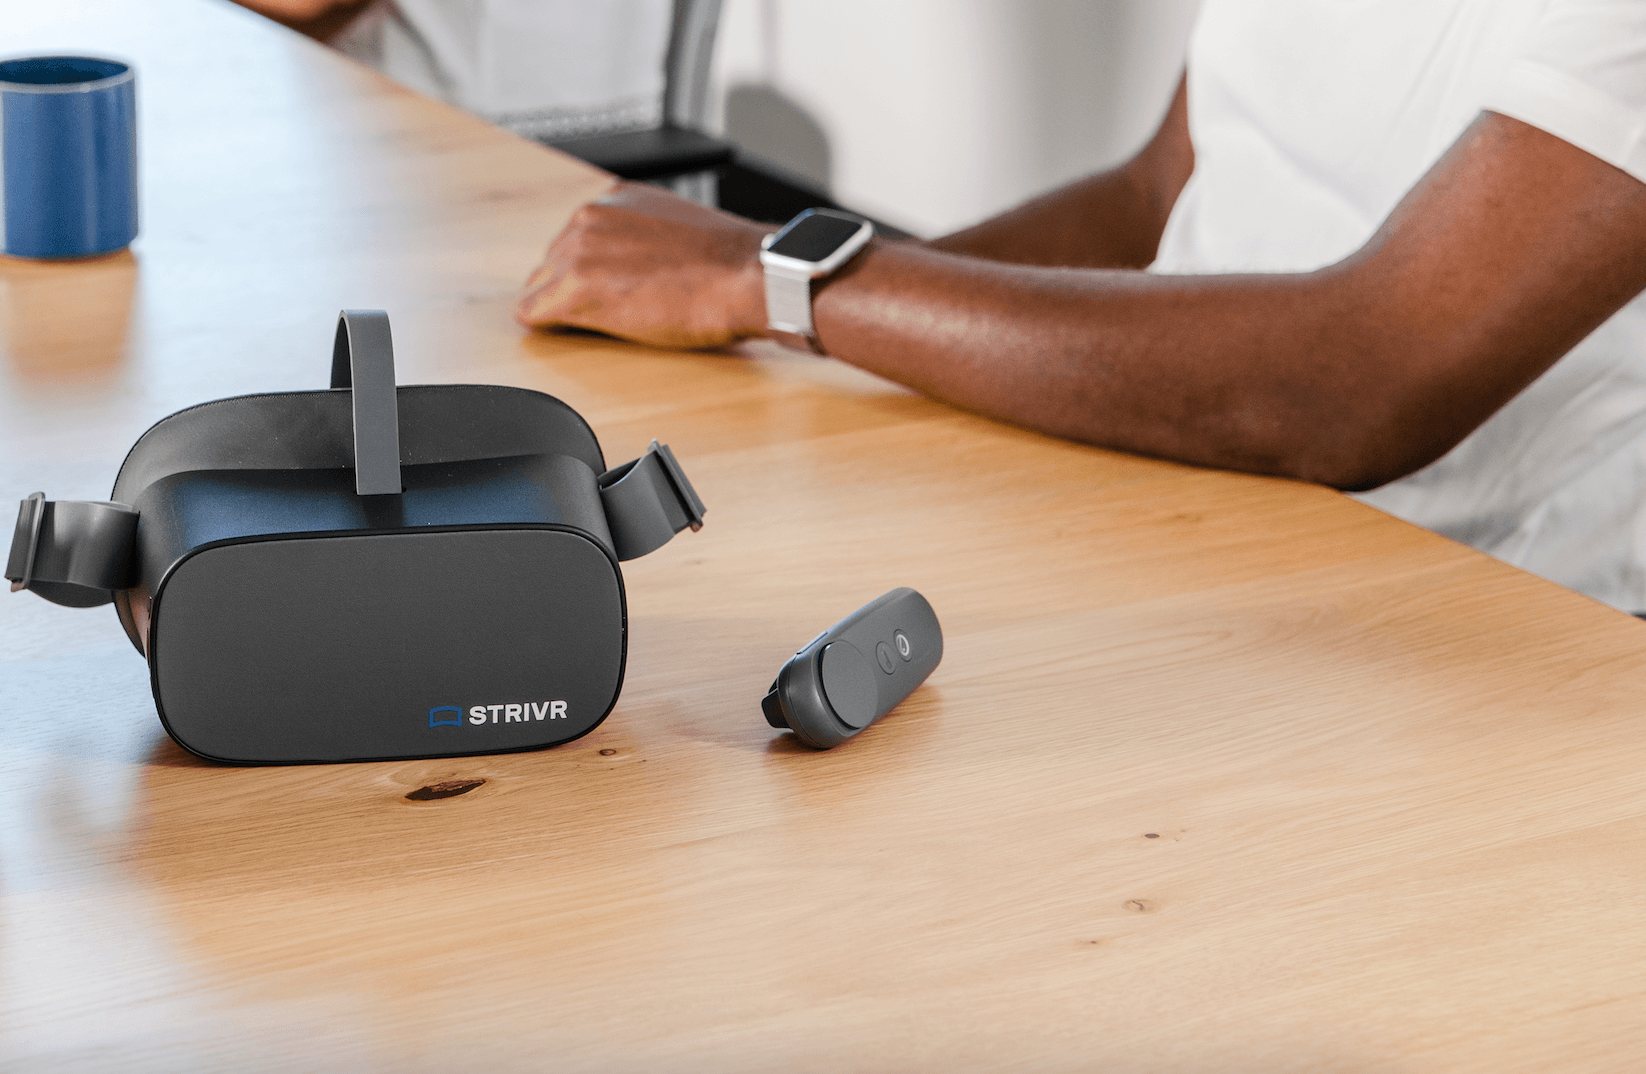 Strivr VR headset and handheld controller sitting on table in front of a black man